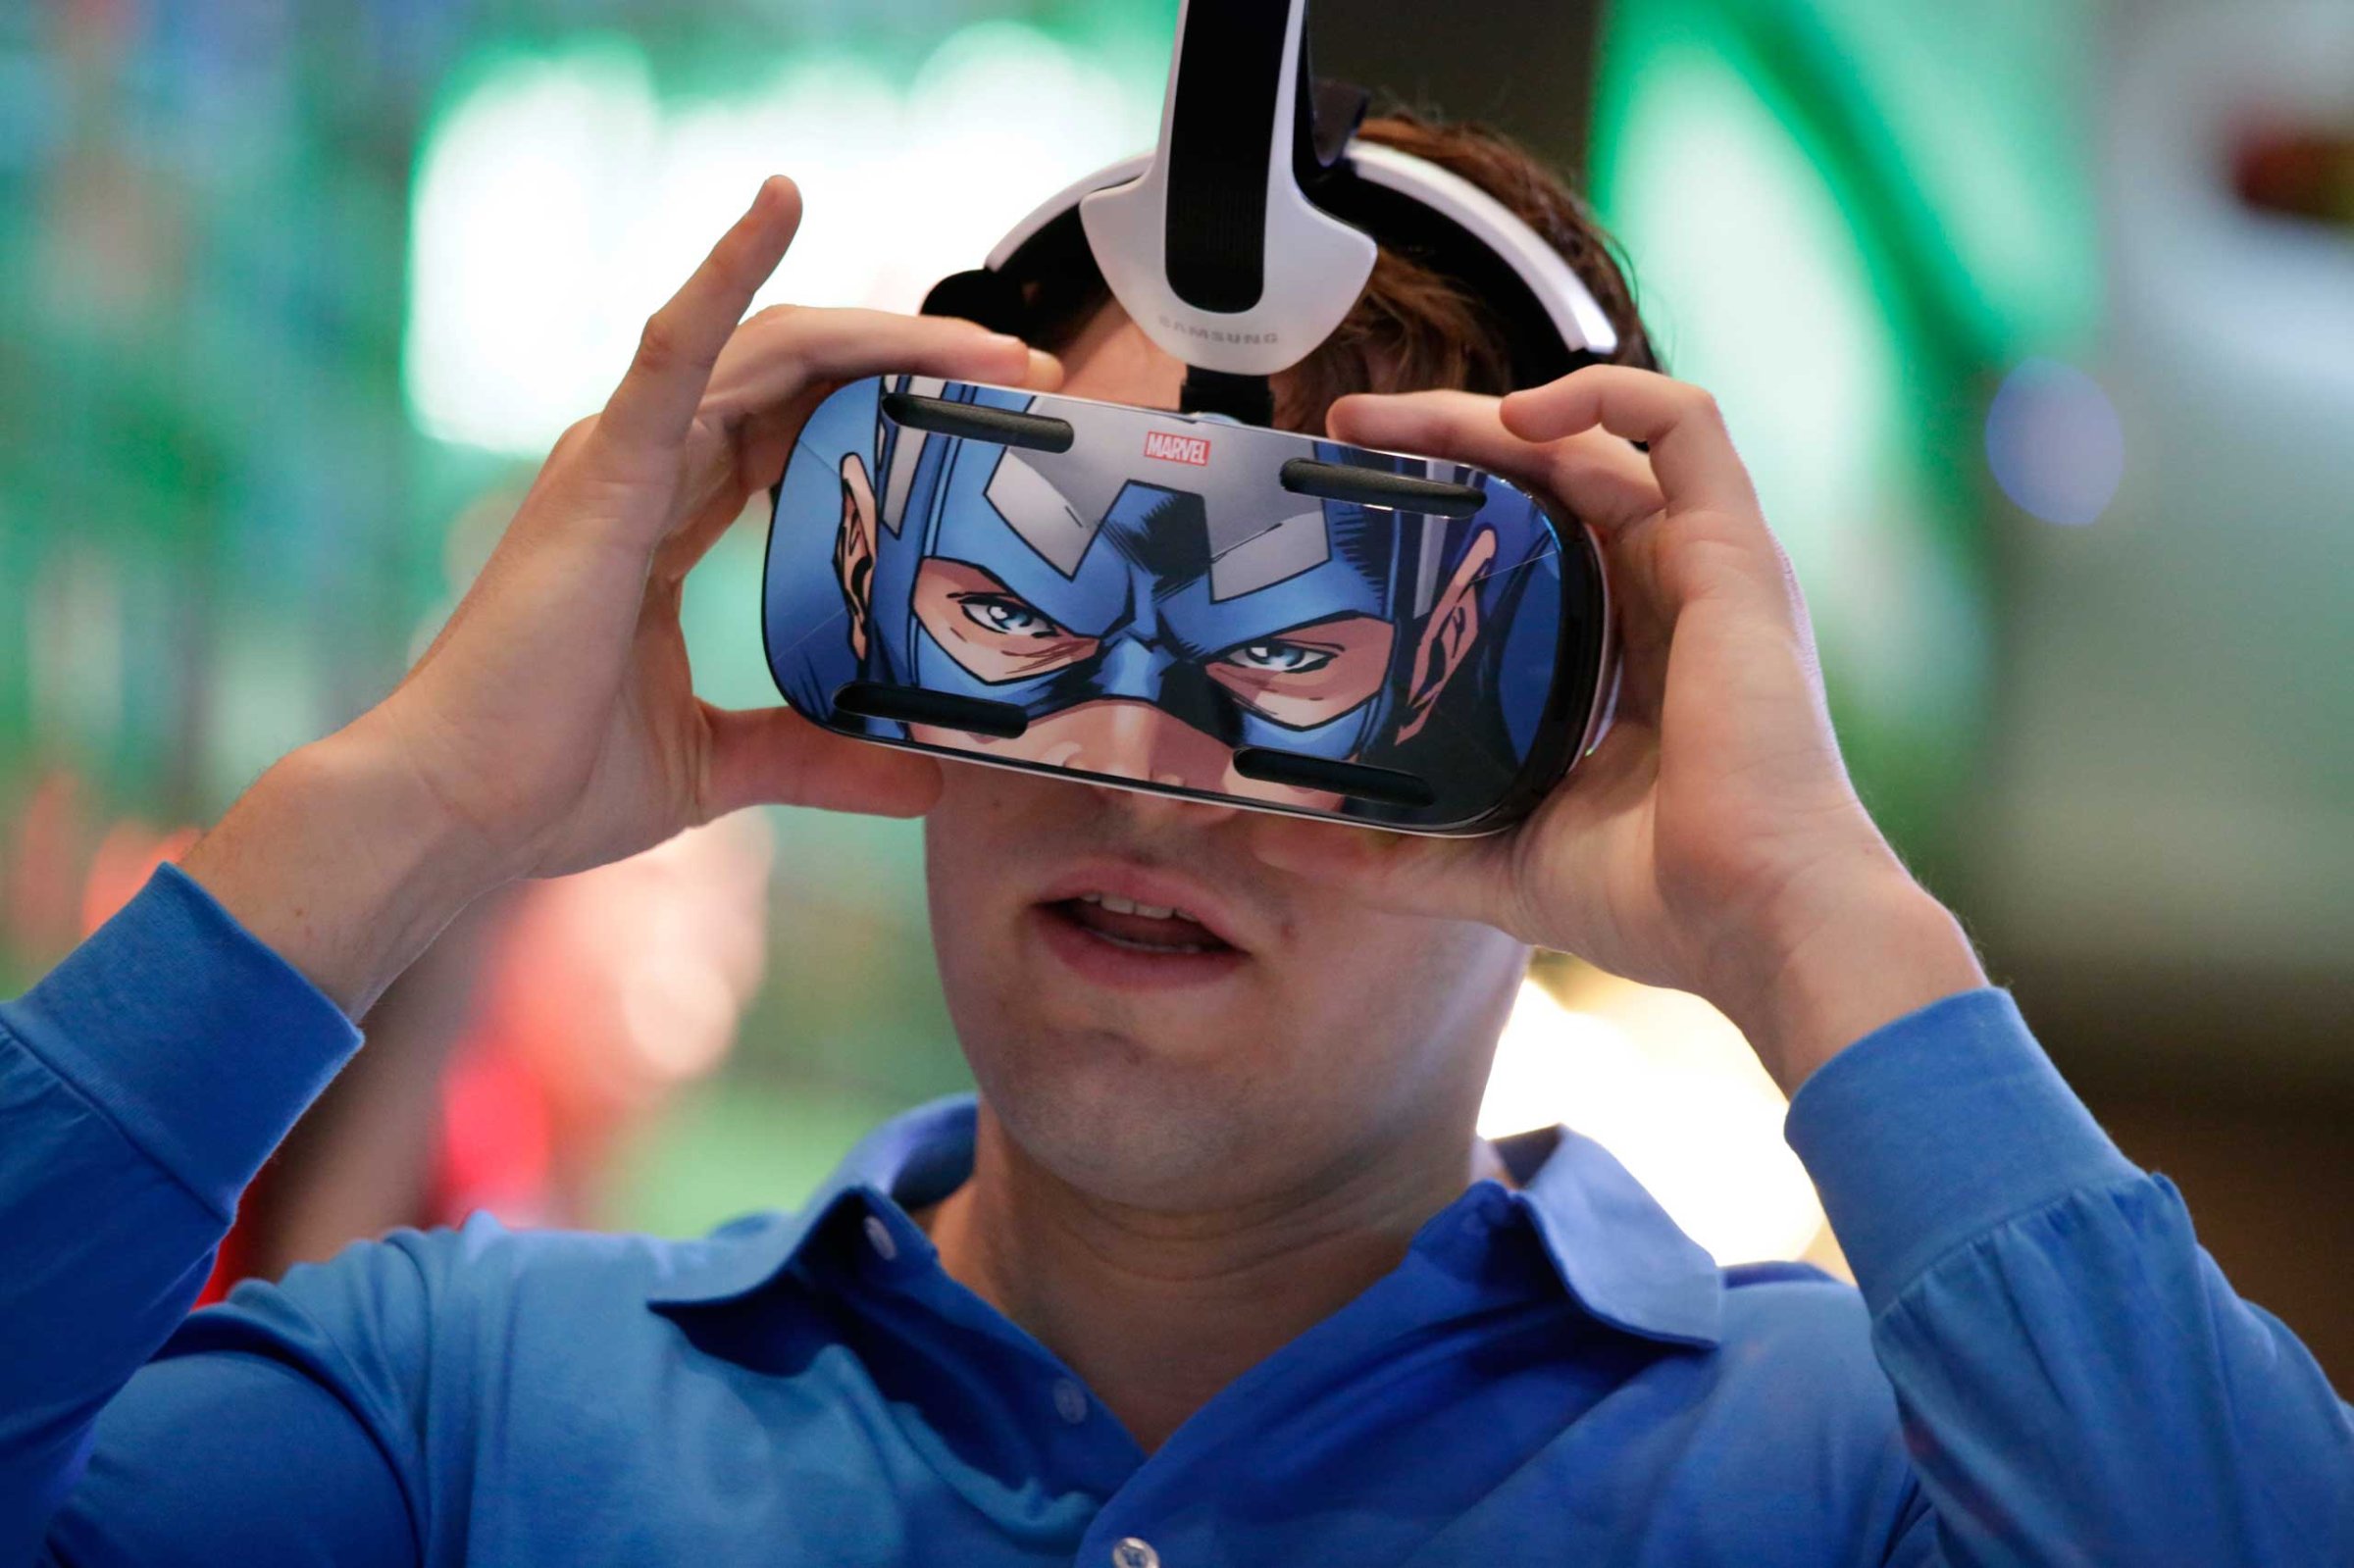 A brand ambassador tests Samsung's Gear VR headset at the Samsung Galaxy booth at the International CES on Jan. 6, 2015, in Las Vegas.